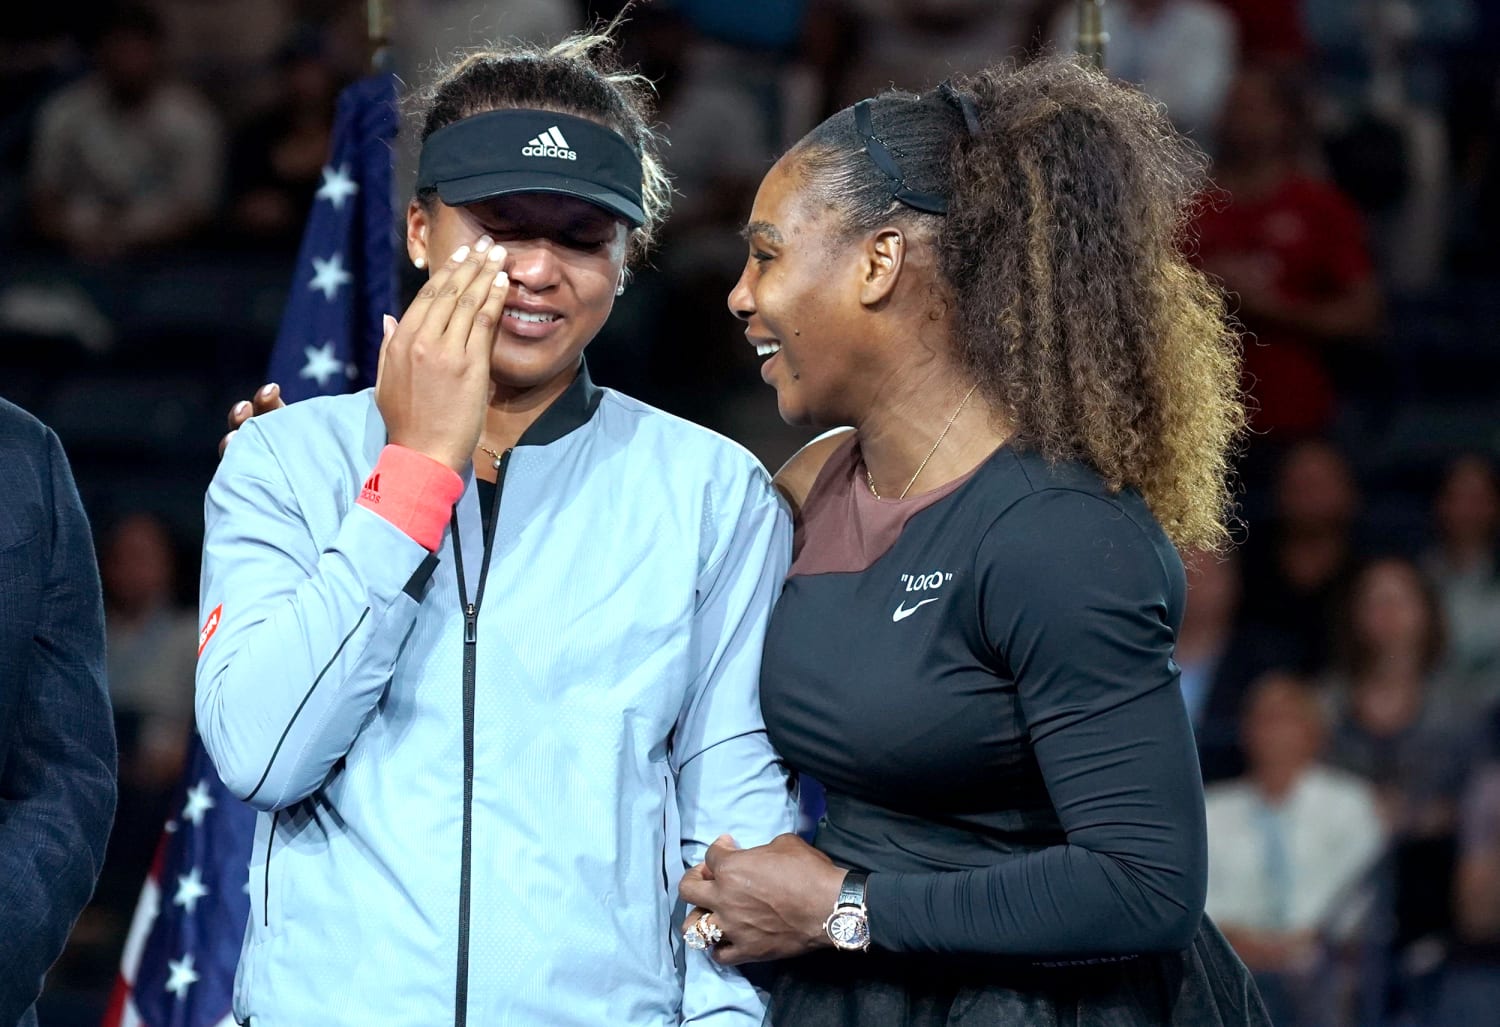 Naomi Osaka: biography, net worth, anti-racism and sexism advocacy, and  becoming the next Serena Williams